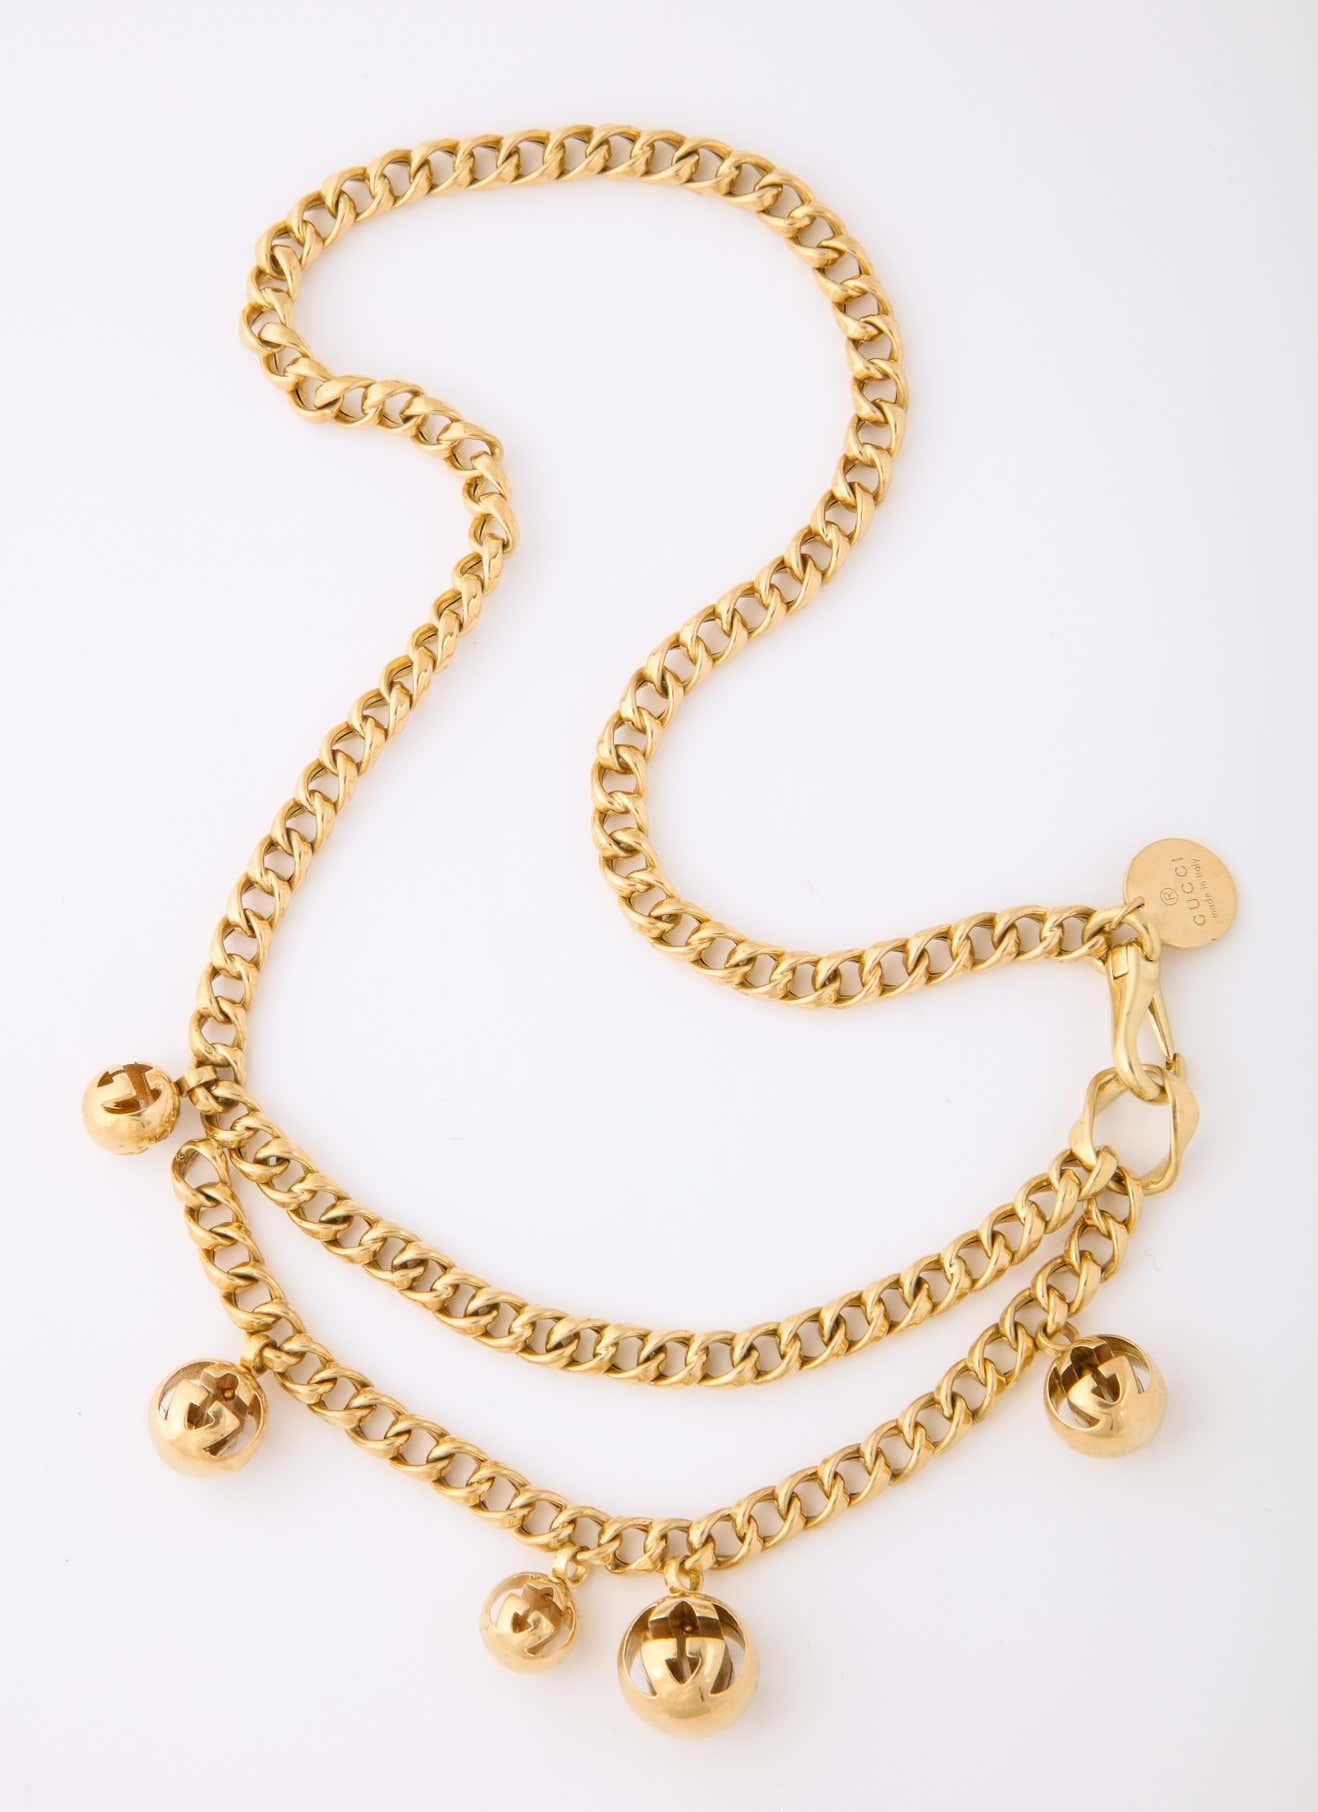 One Ladies 18kt Yellow Gold Double Layer Link Necklace,Exhibiting An Unusual 18kt Watch Chain Style Clasp For Easy Wear.Necklace Is Designed With Five Gucci Signature Design Cow Bell Motif Embellishments.Signed Gucci, Circa 1990's.
